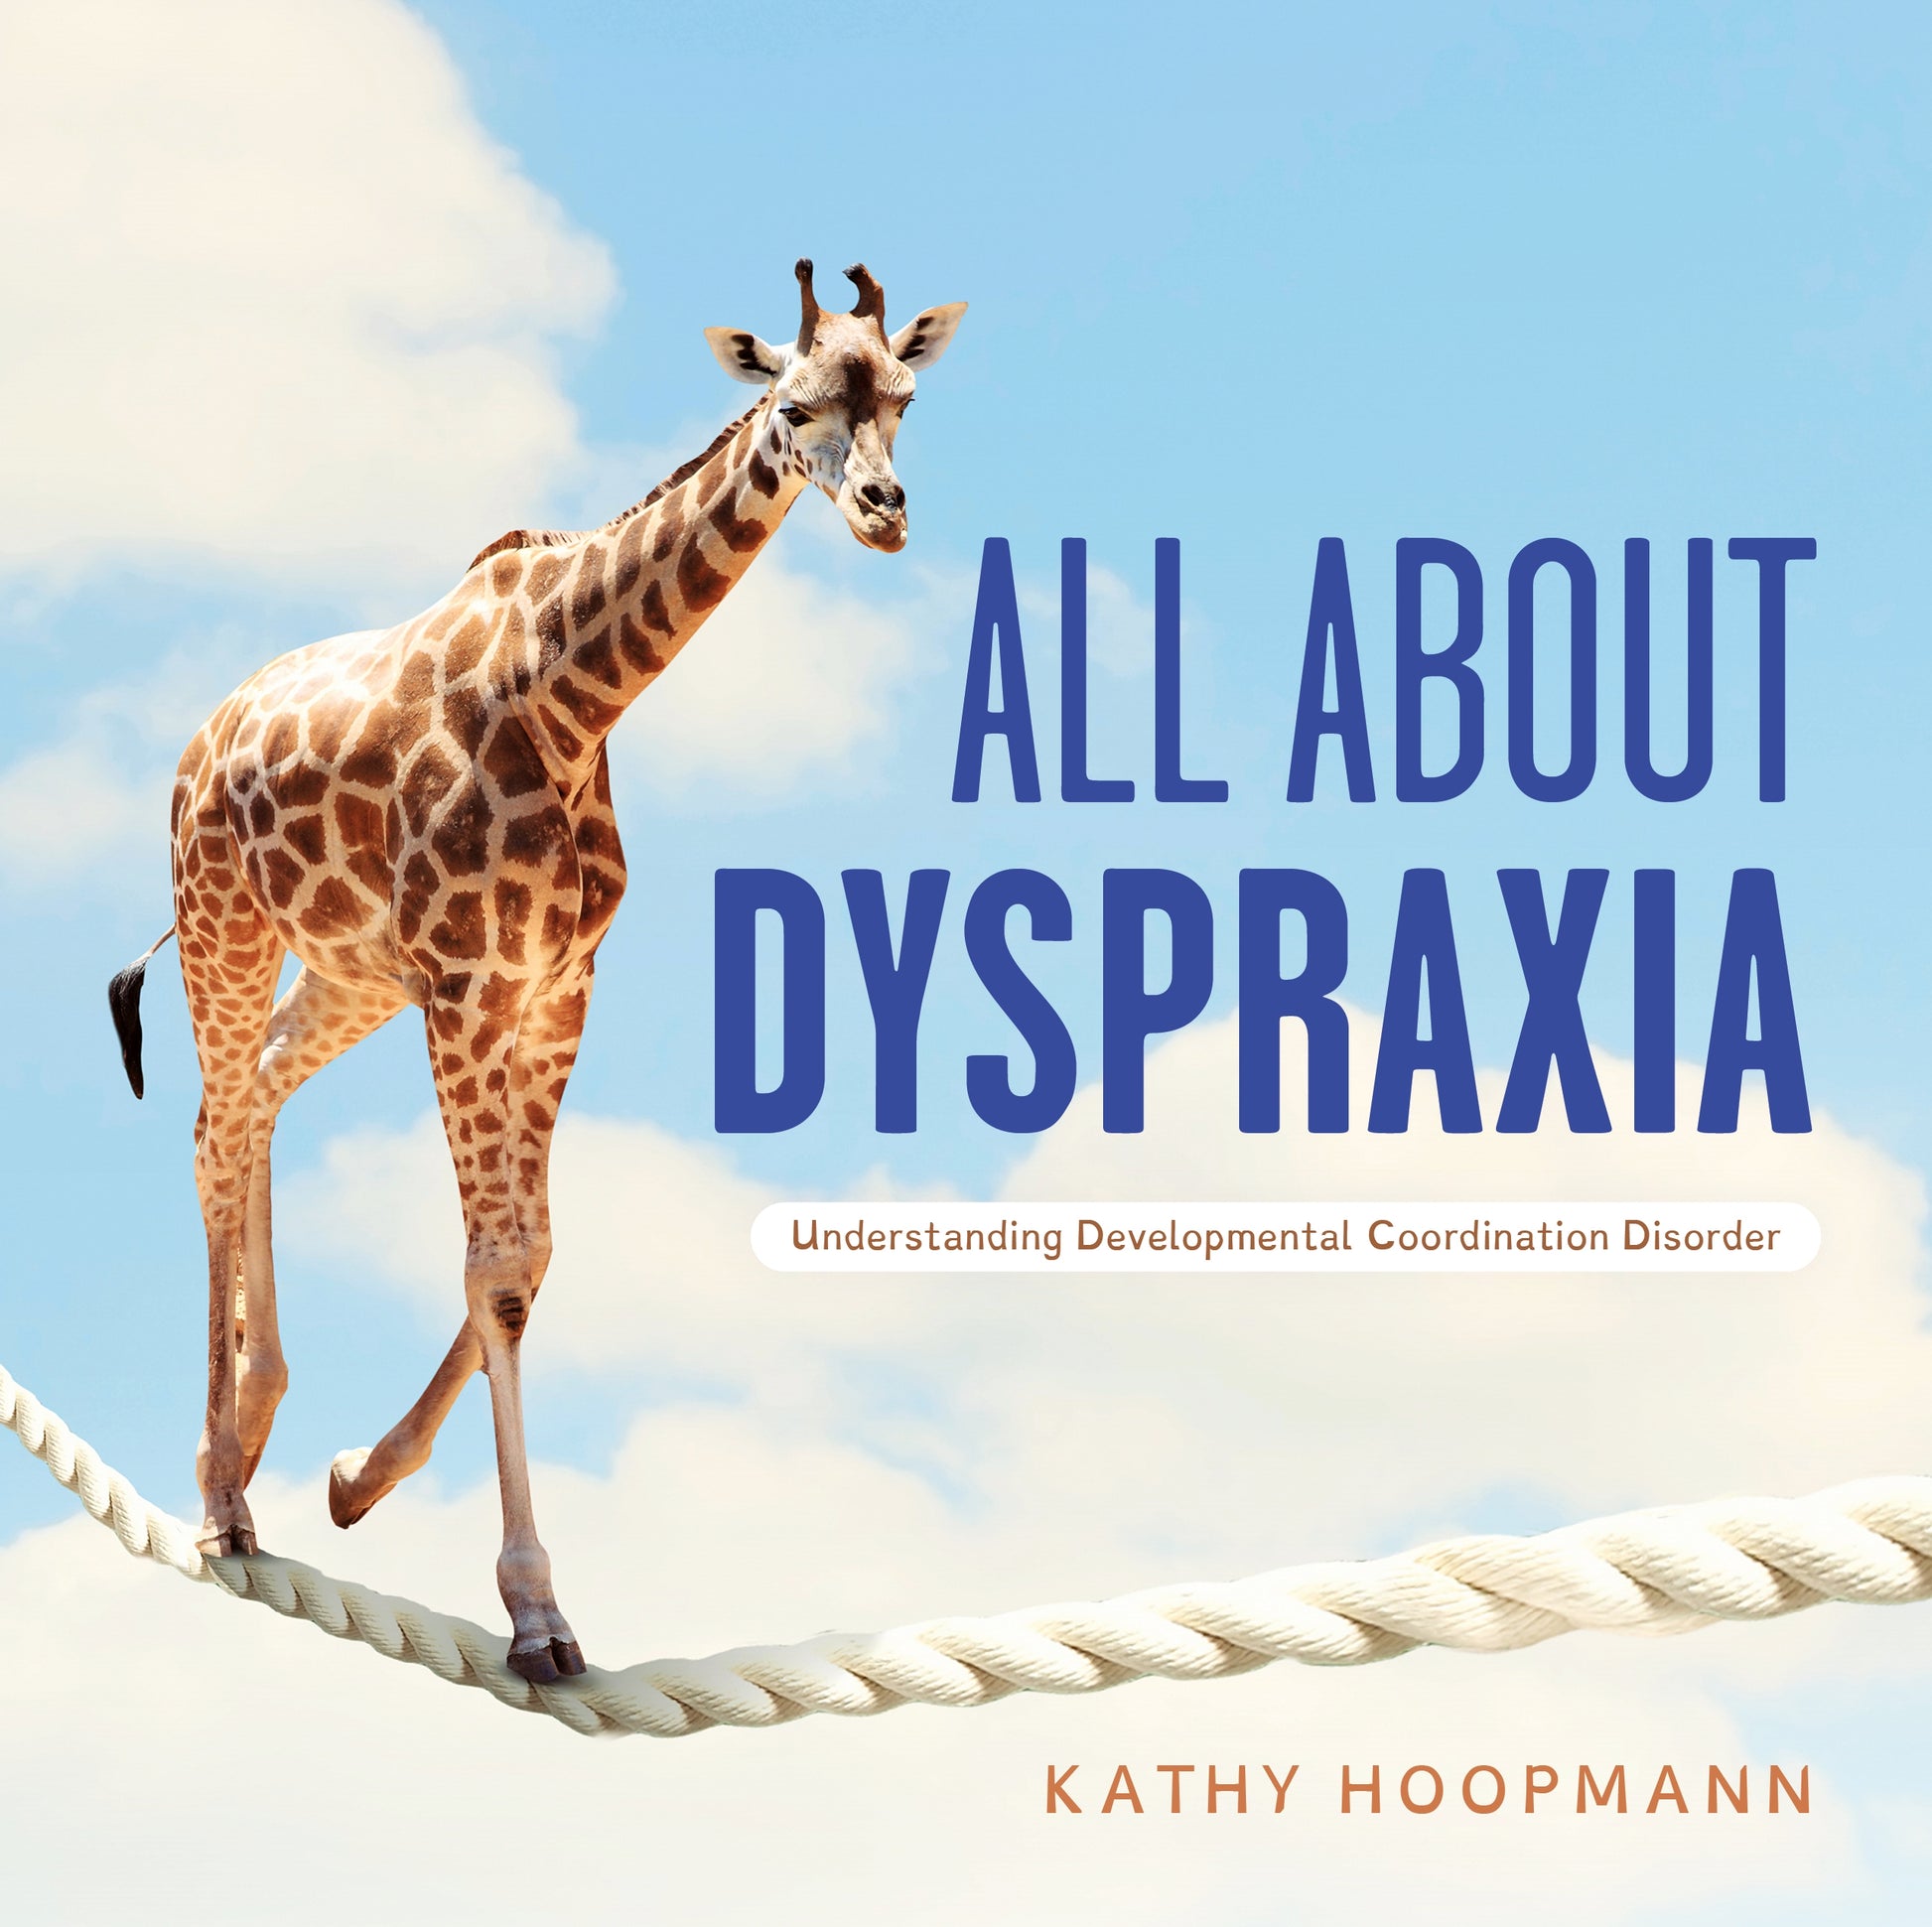 All About Dyspraxia by Kathy Hoopmann